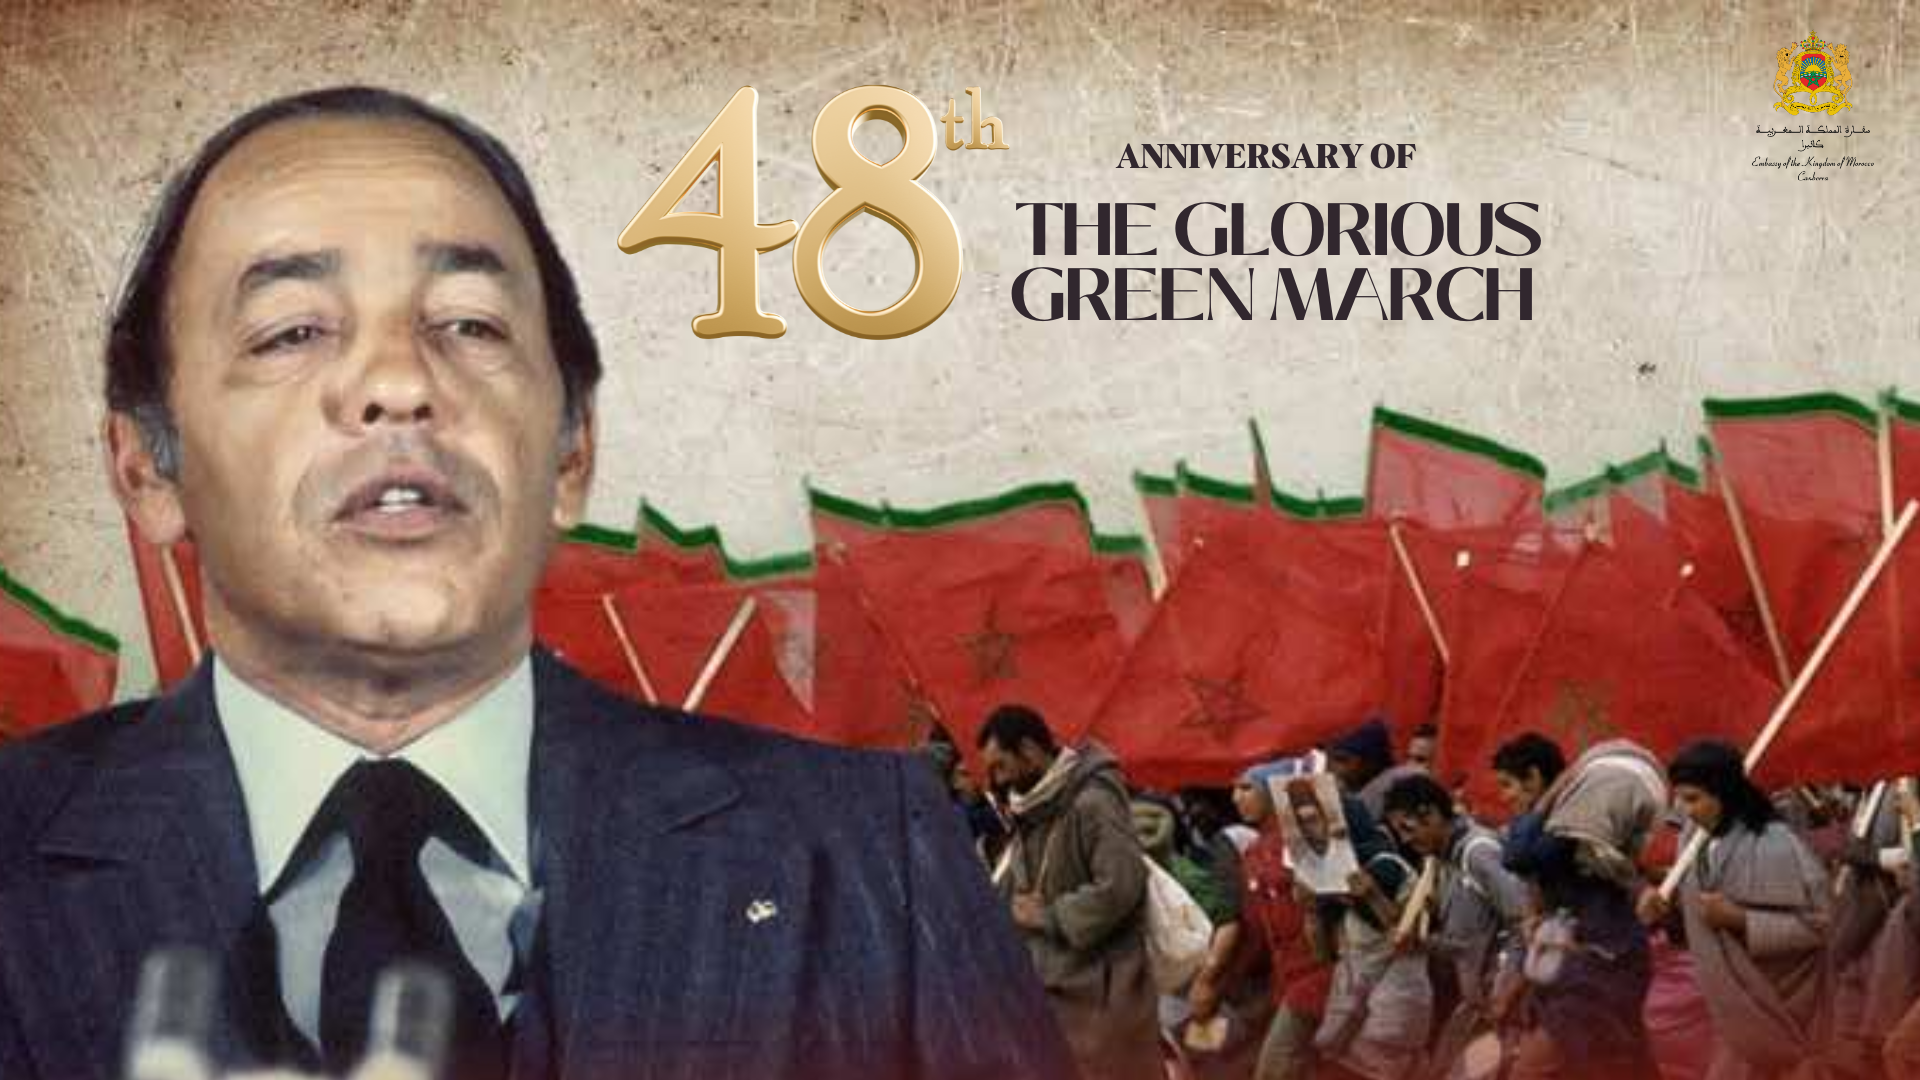 The 48th anniversary of the glorious Green March